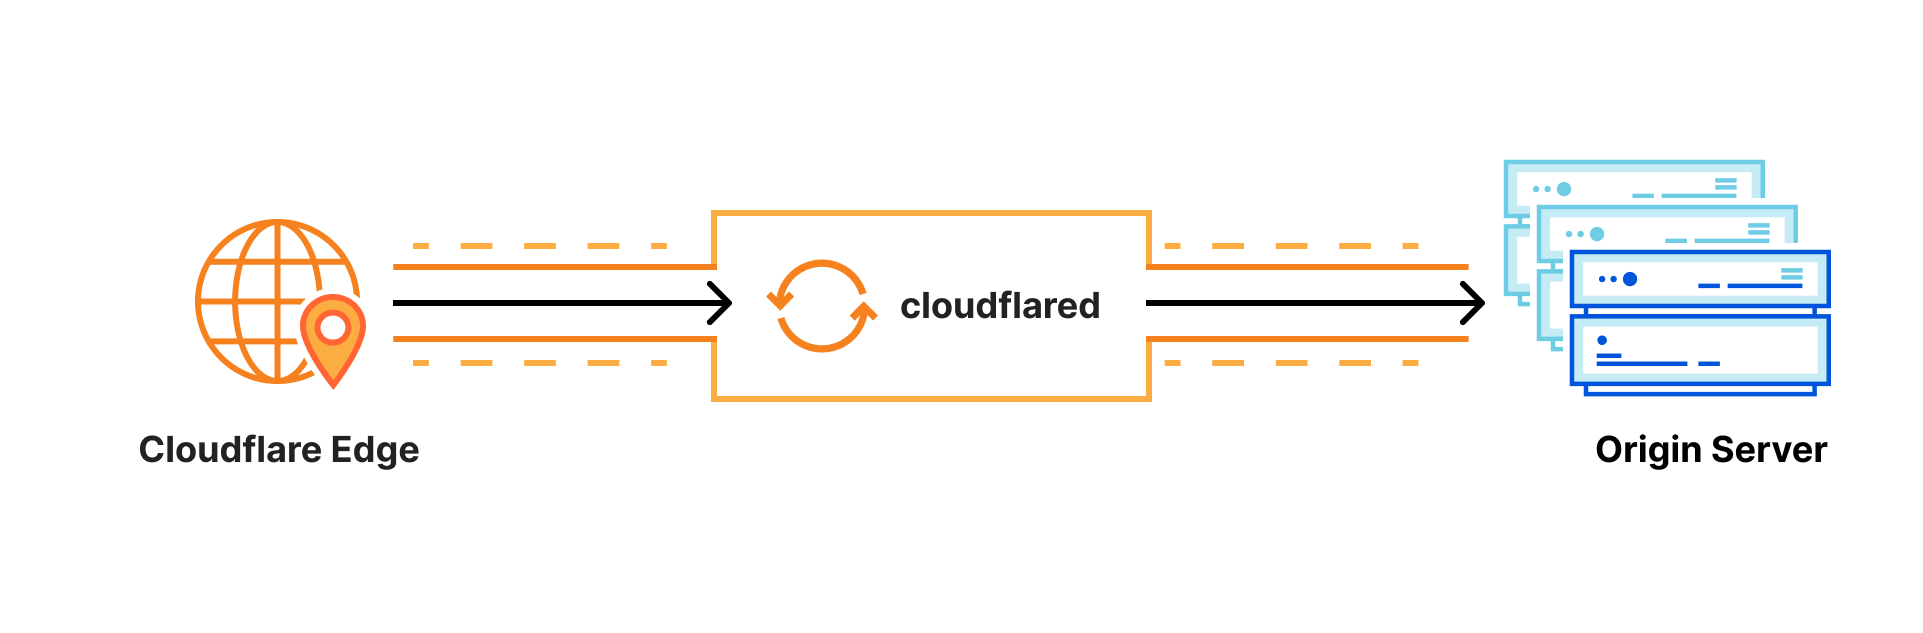 ssh tunnel cloudflare